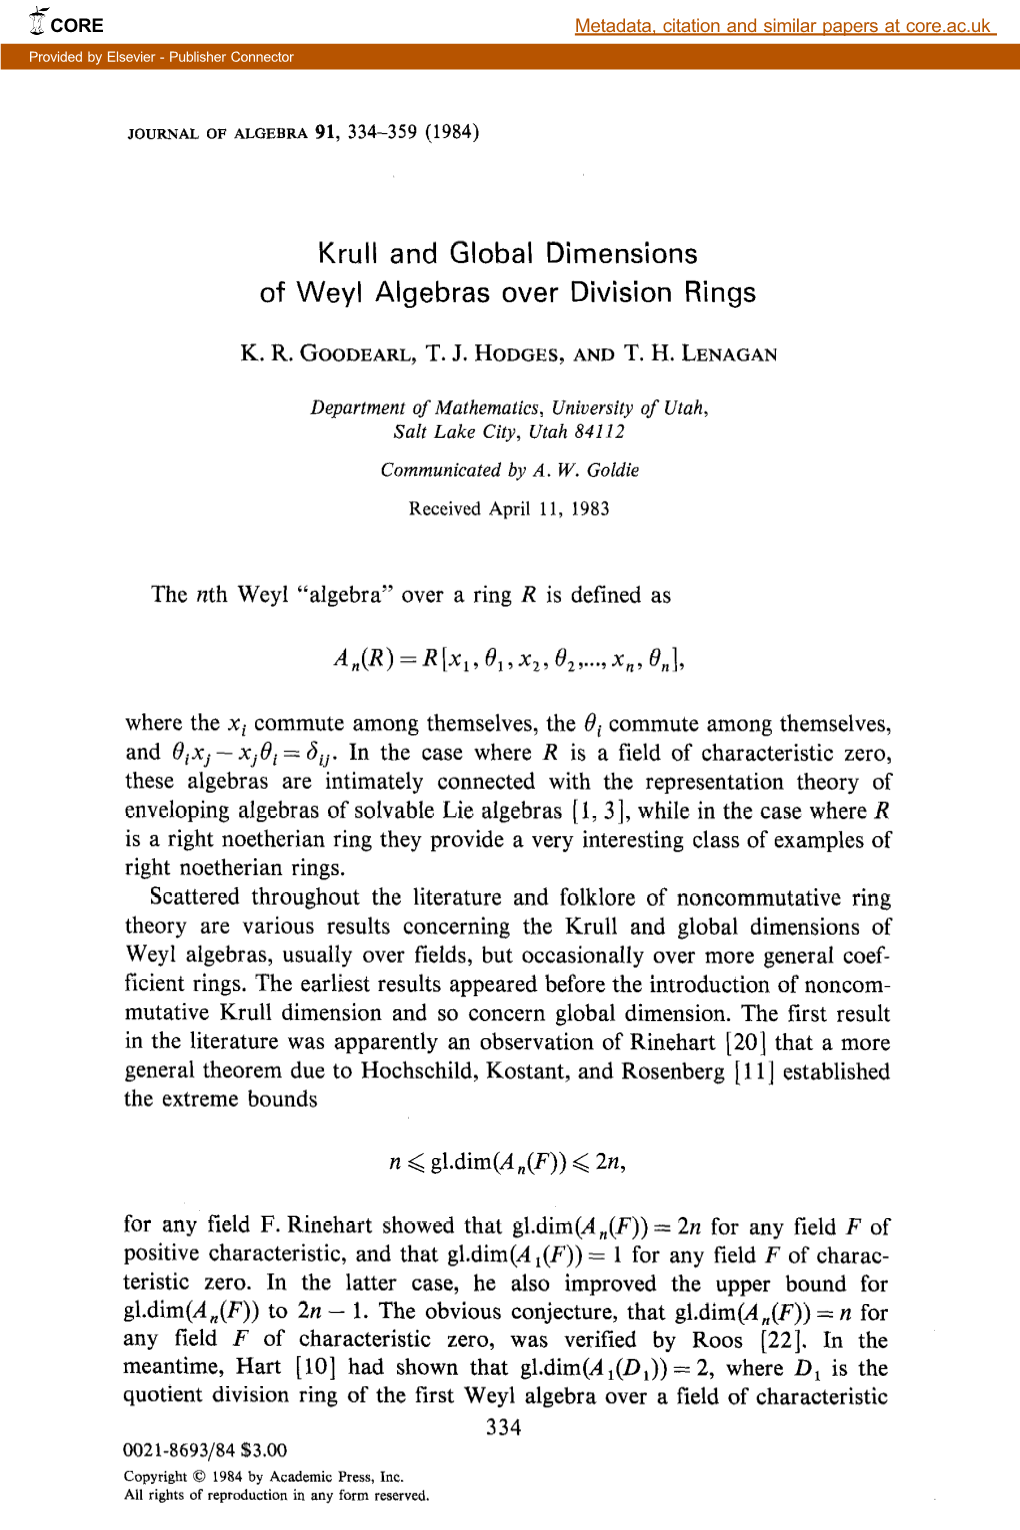 Krull and Global Dimensions of Weyl Algebras Over Division Rings A,(R